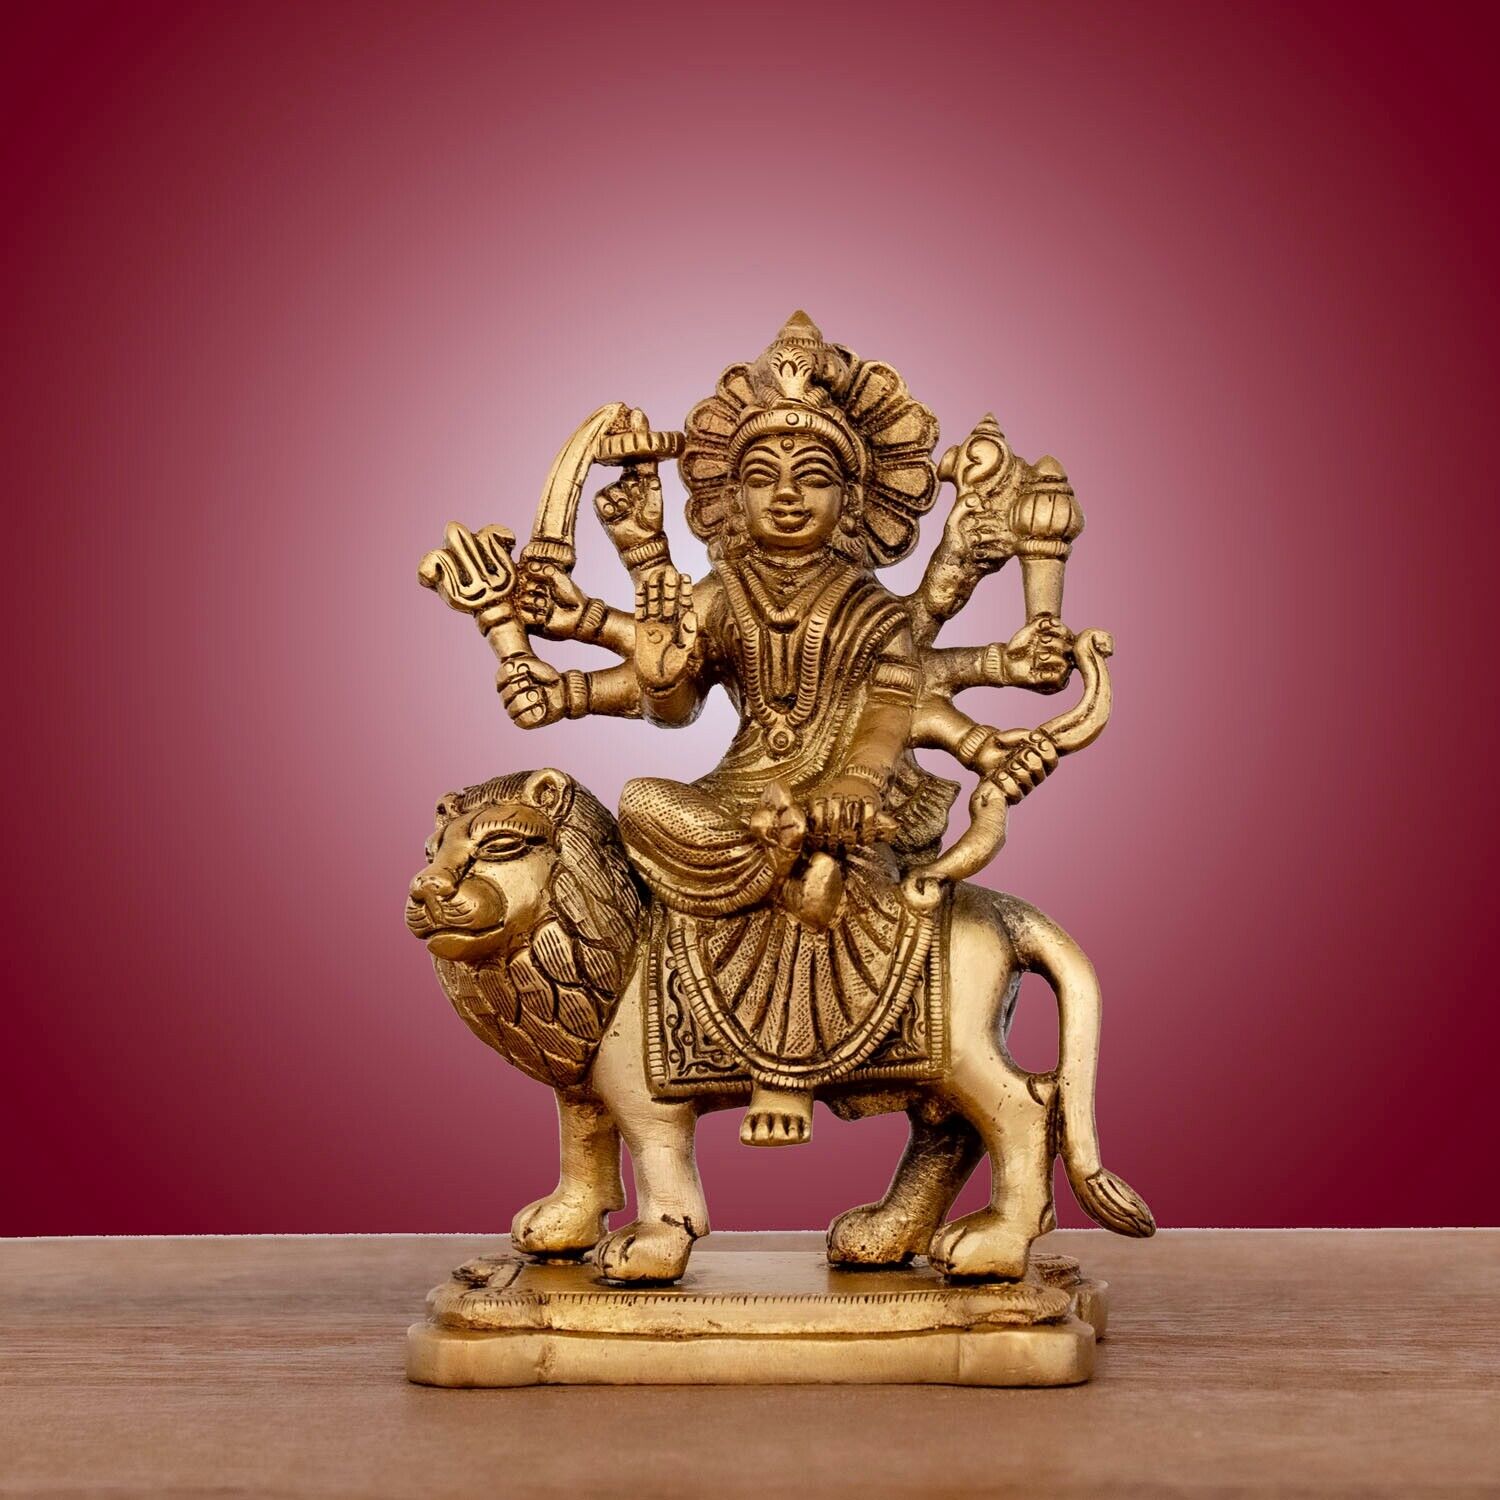 Brass Durga Statue for Pooja Room | Size - (3.5 x 2.5 x 5) Inches | Indigenite